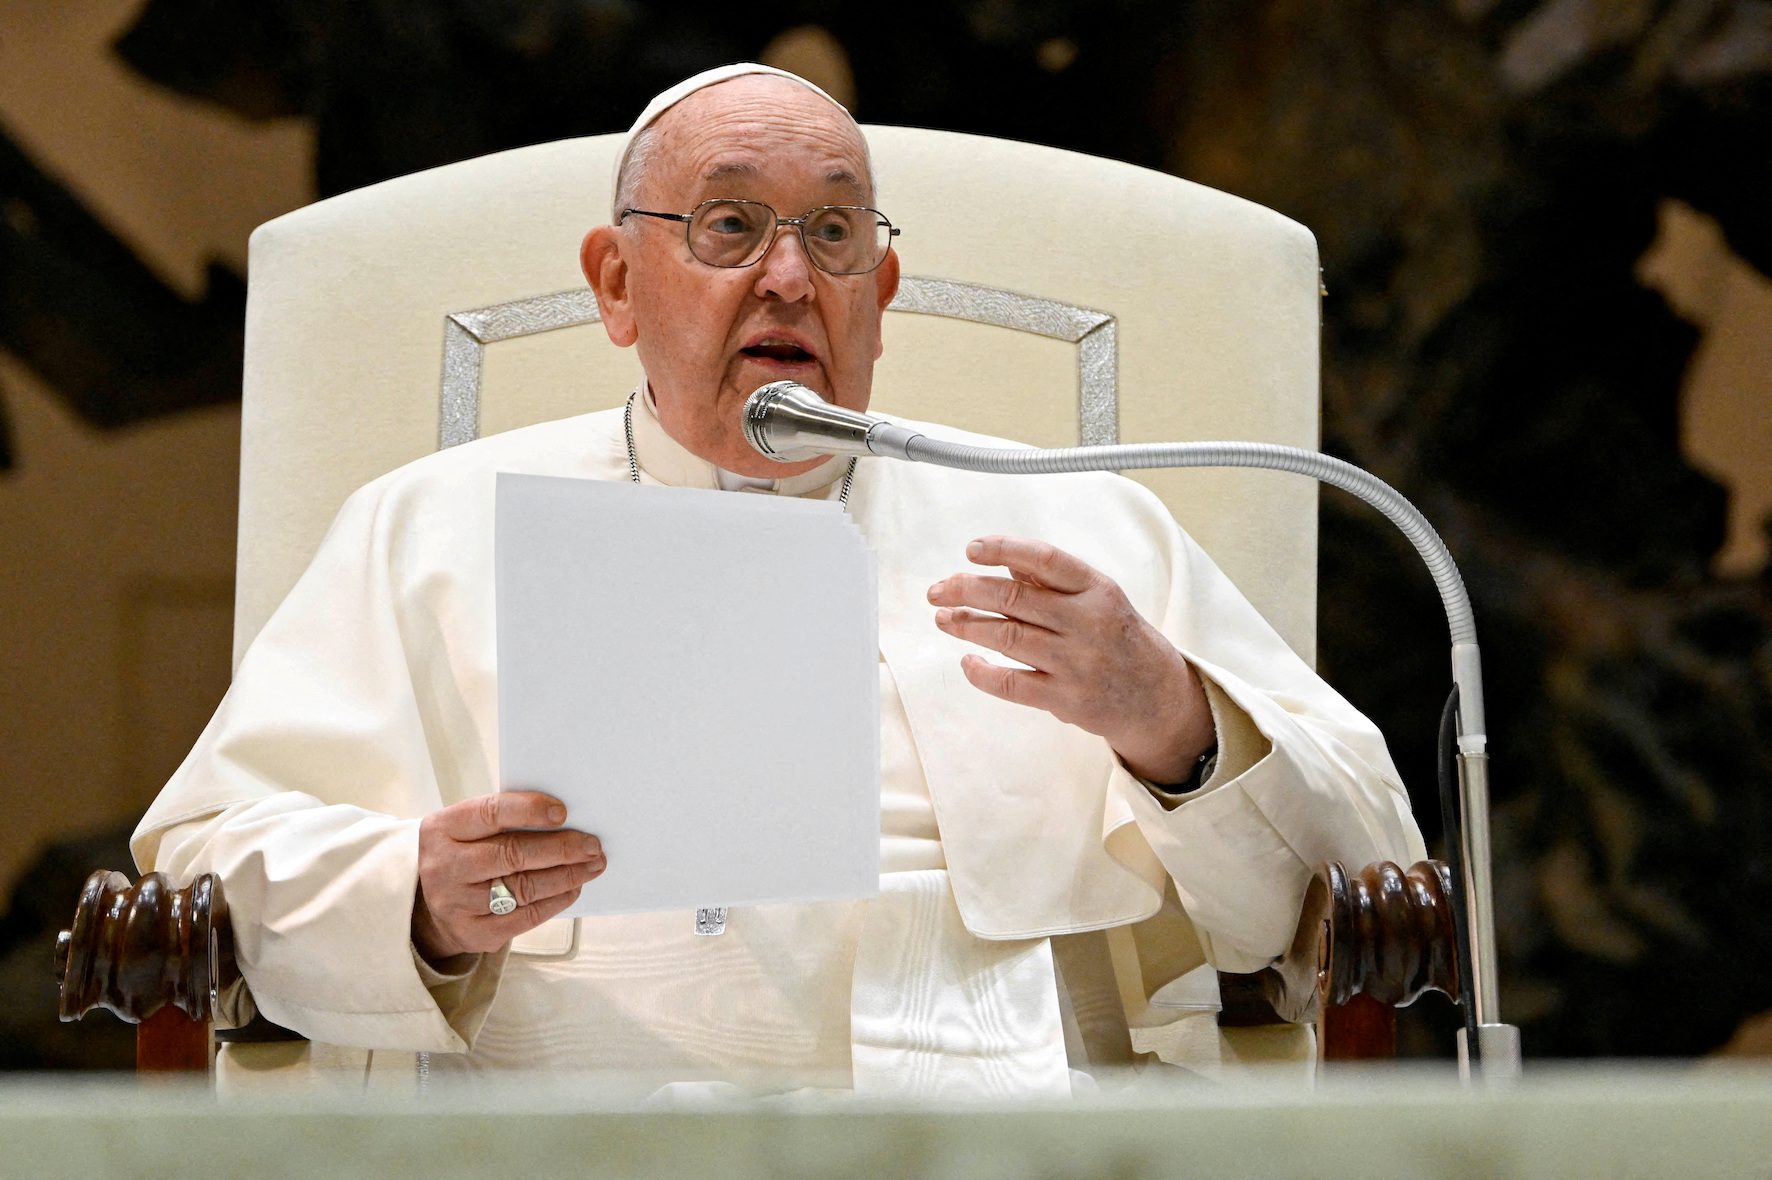 Pope Francis halts speech saying he has ‘a touch of bronchitis’